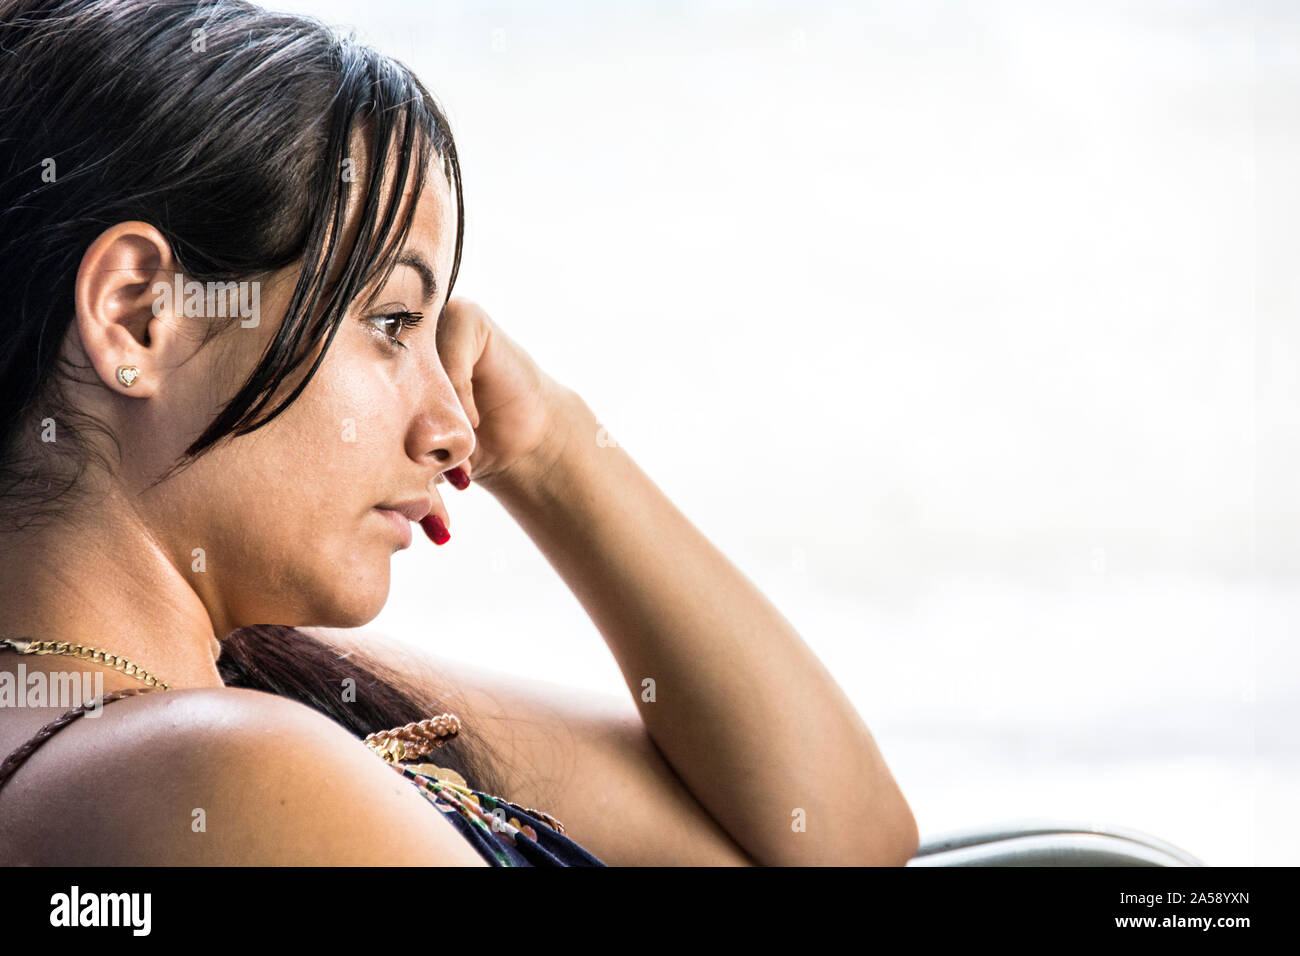 A young, Cuban woman, aged 25, contemplating her life. Stock Photo